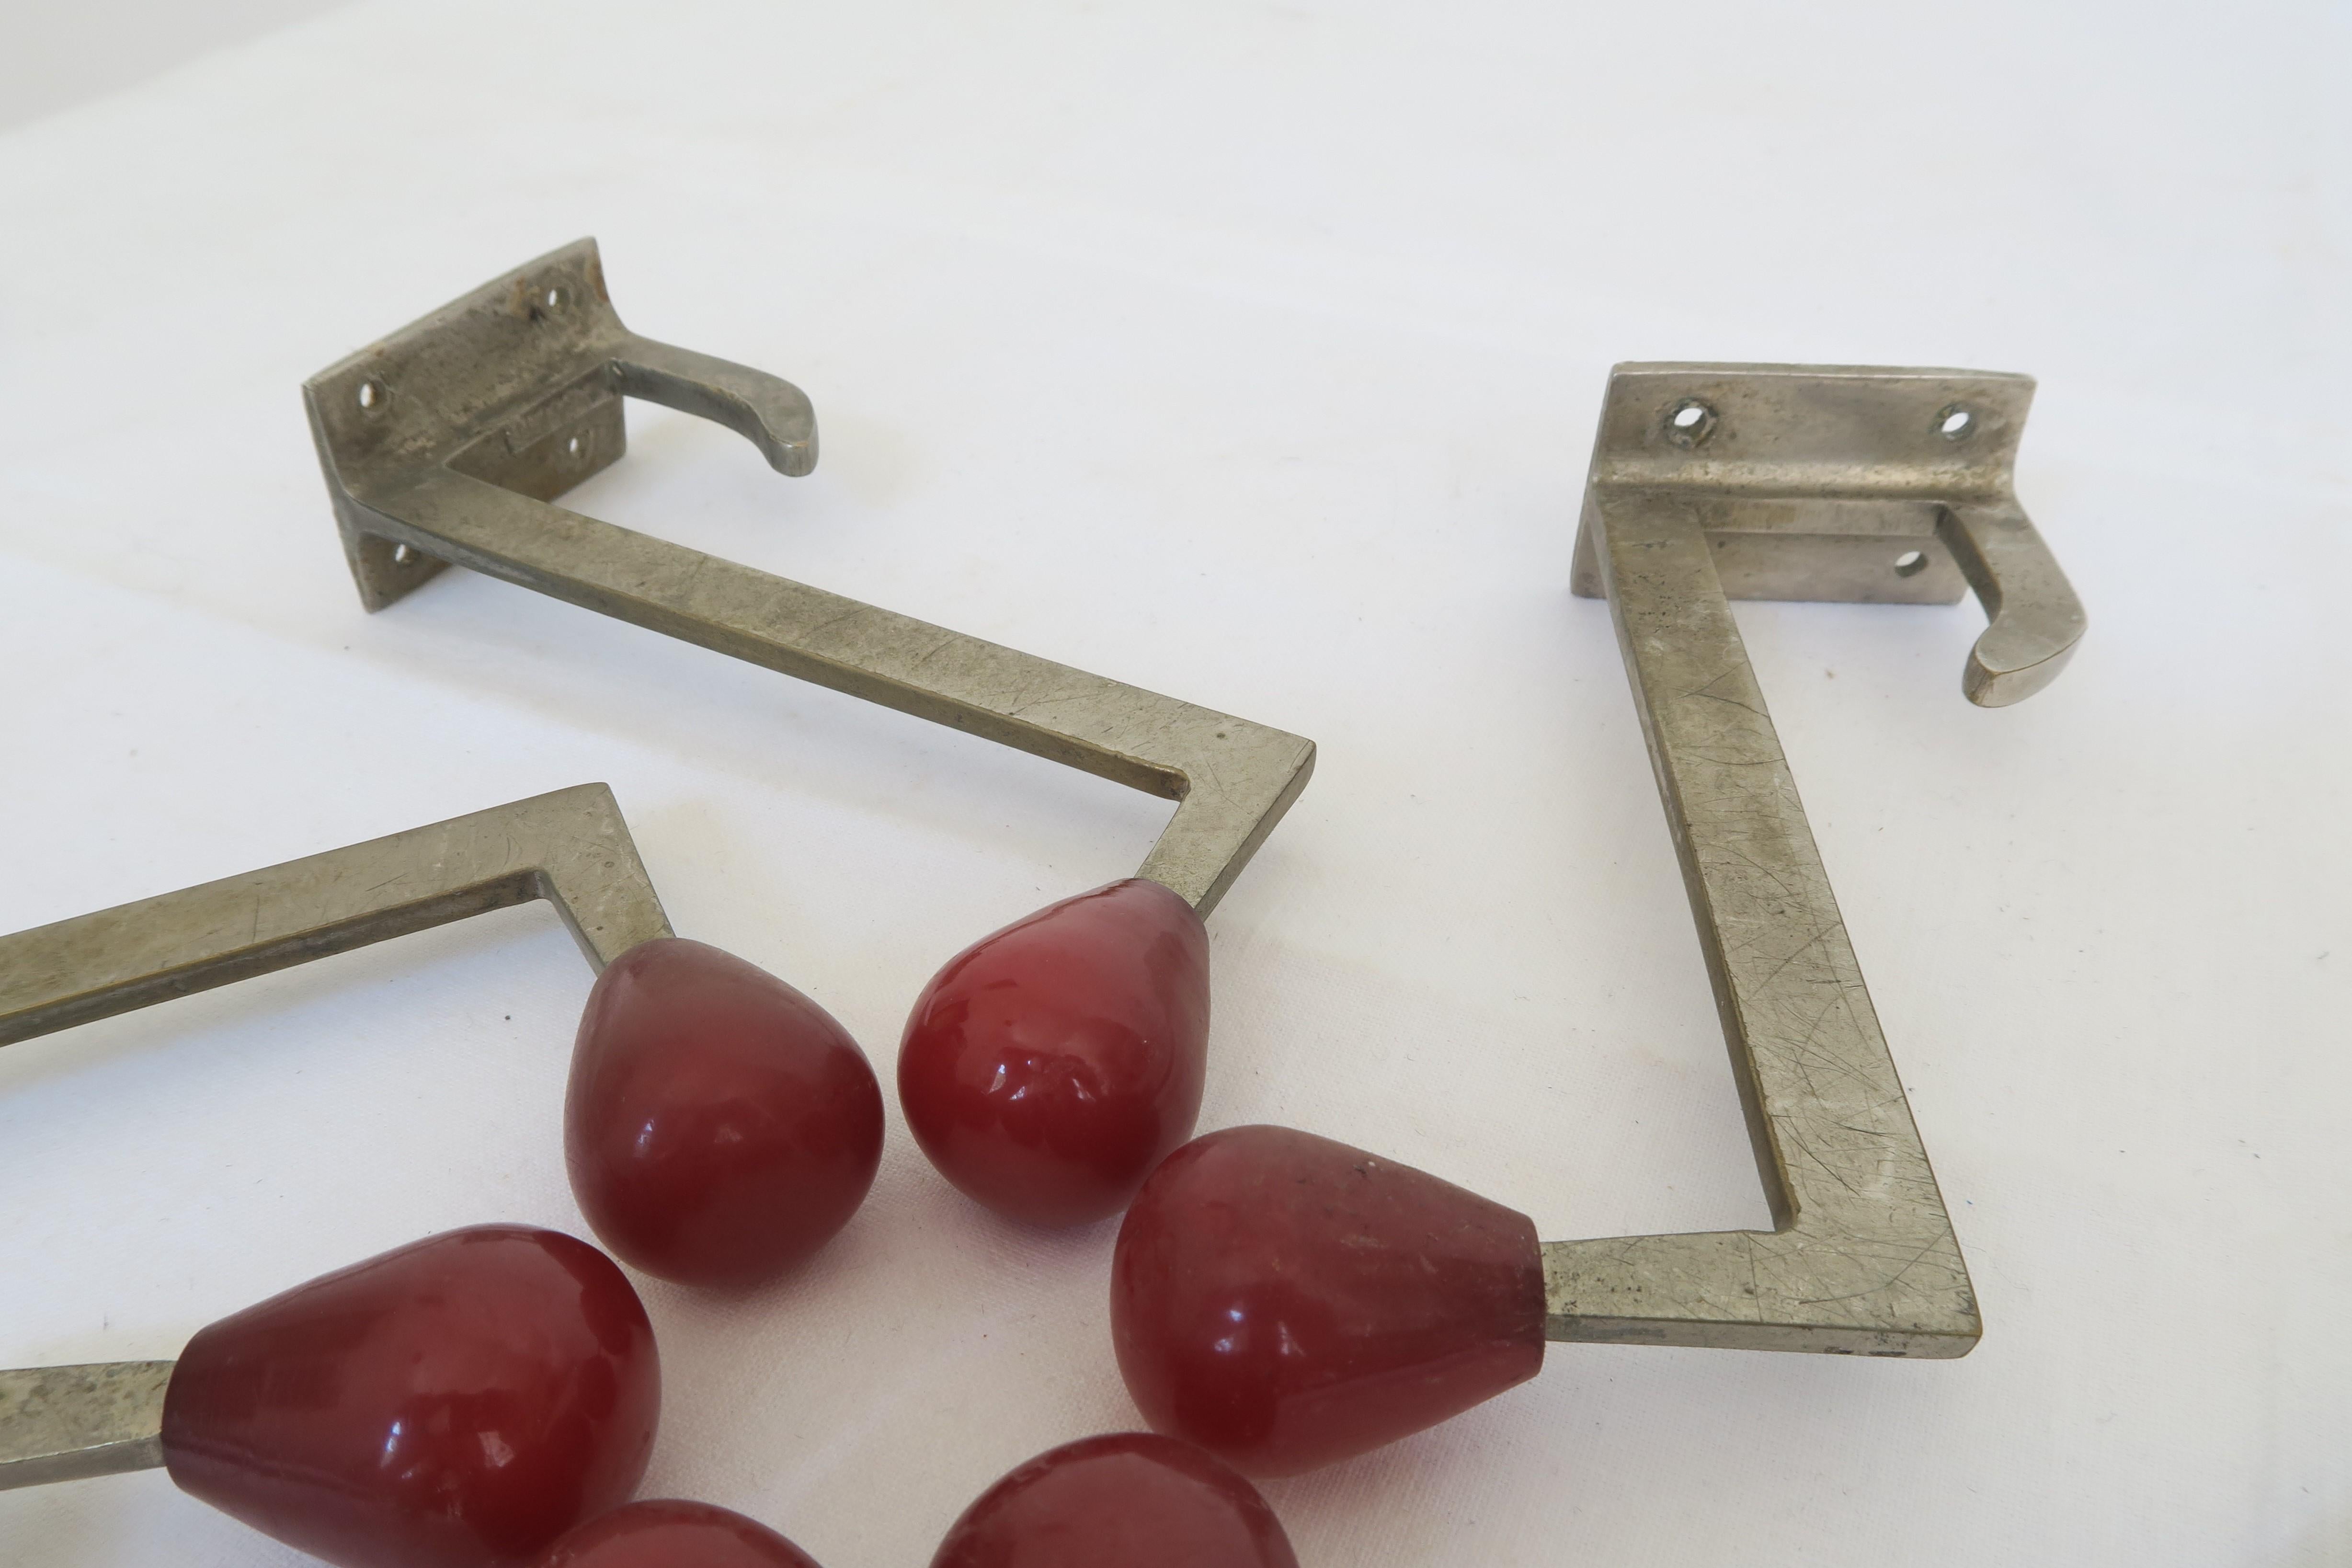 For sale is a exceptional set of six coat hooks. They were manufactured in the 1920s in the style of Art Deco. The hooks are made of solid brass and embellished with a deep red plastic cap at the tip. They can be mounted to the wall by use of four